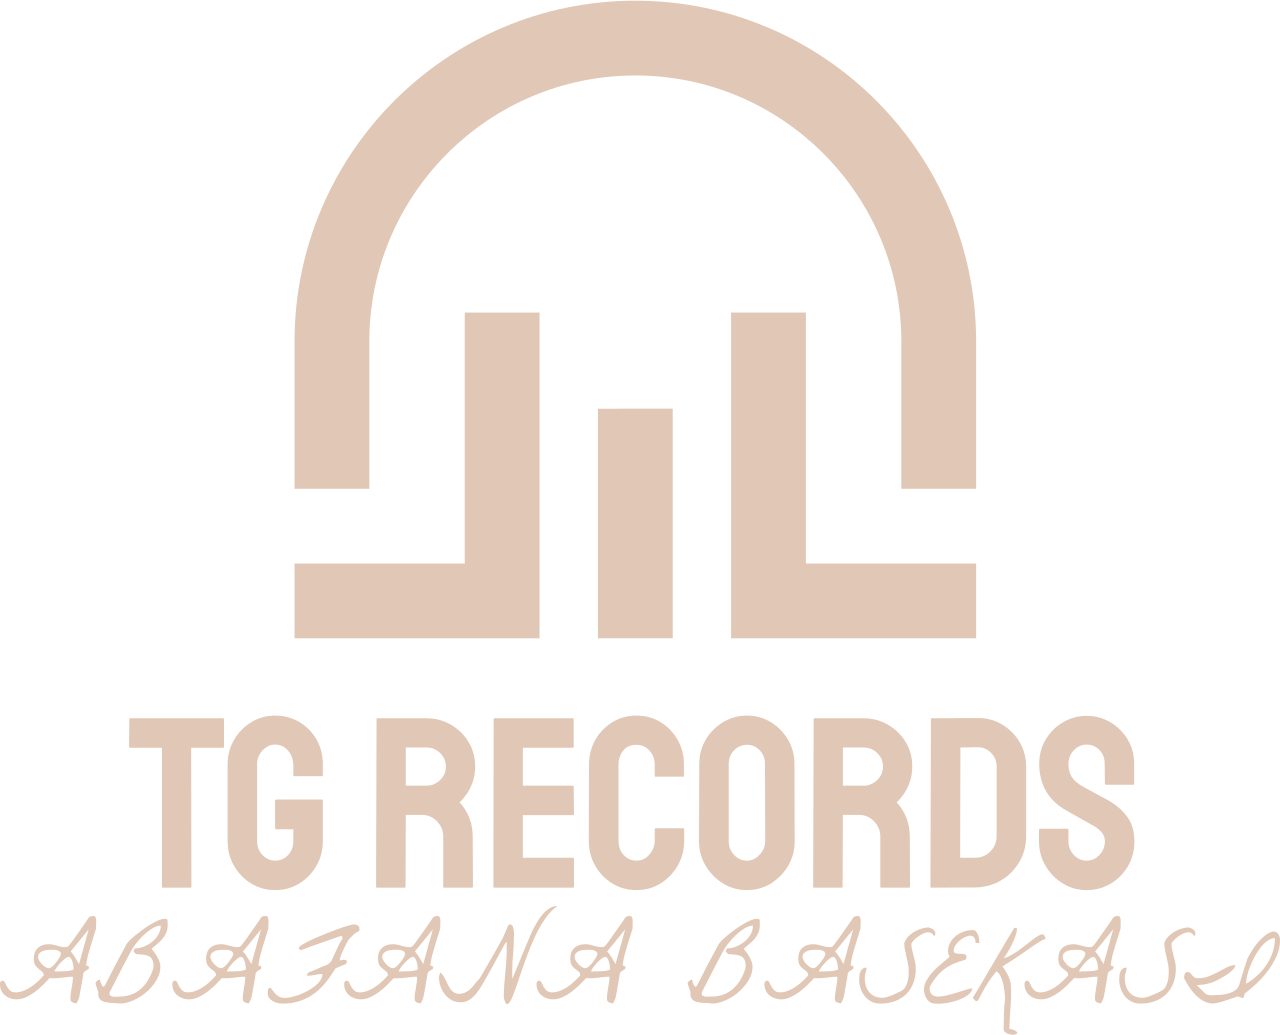 TG RECORDS's web page